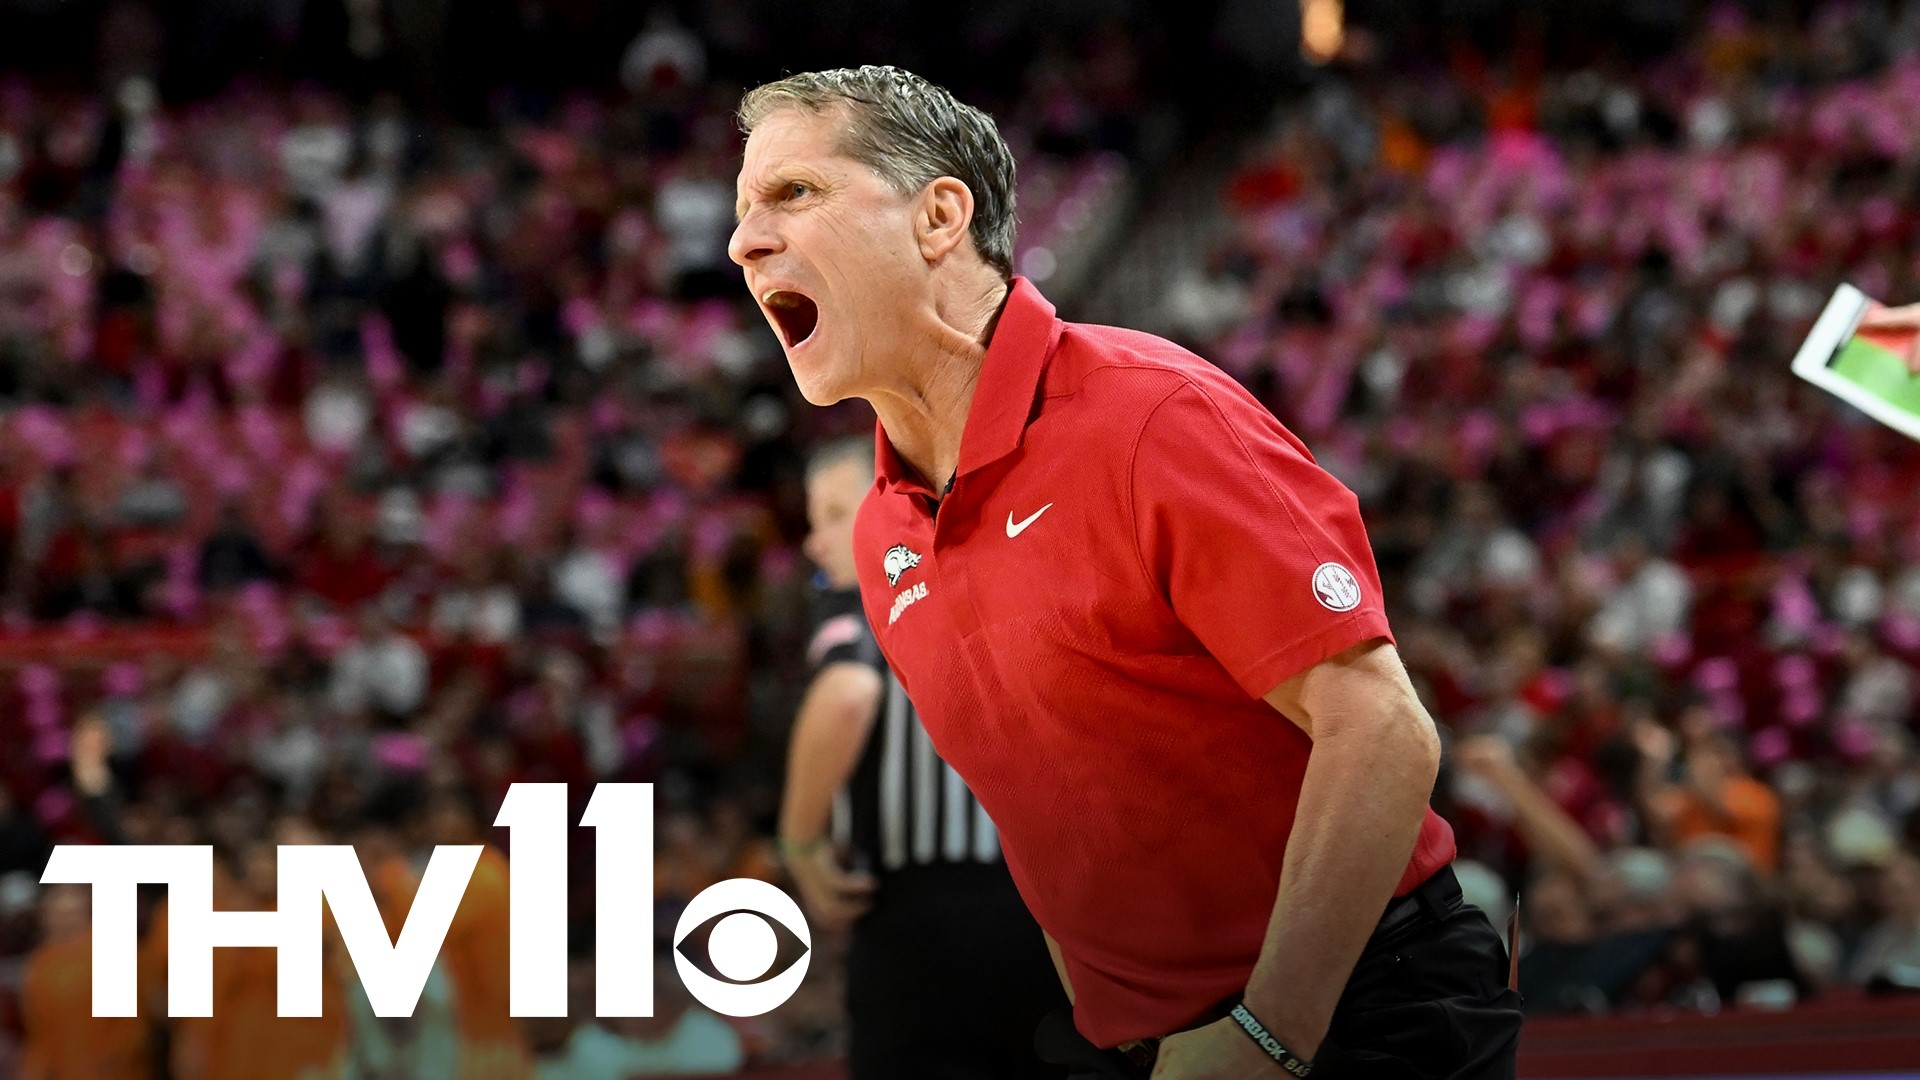 After five seasons at Arkansas, Eric Musselman is leaving Fayetteville to join the USC Trojans as their new head coach.